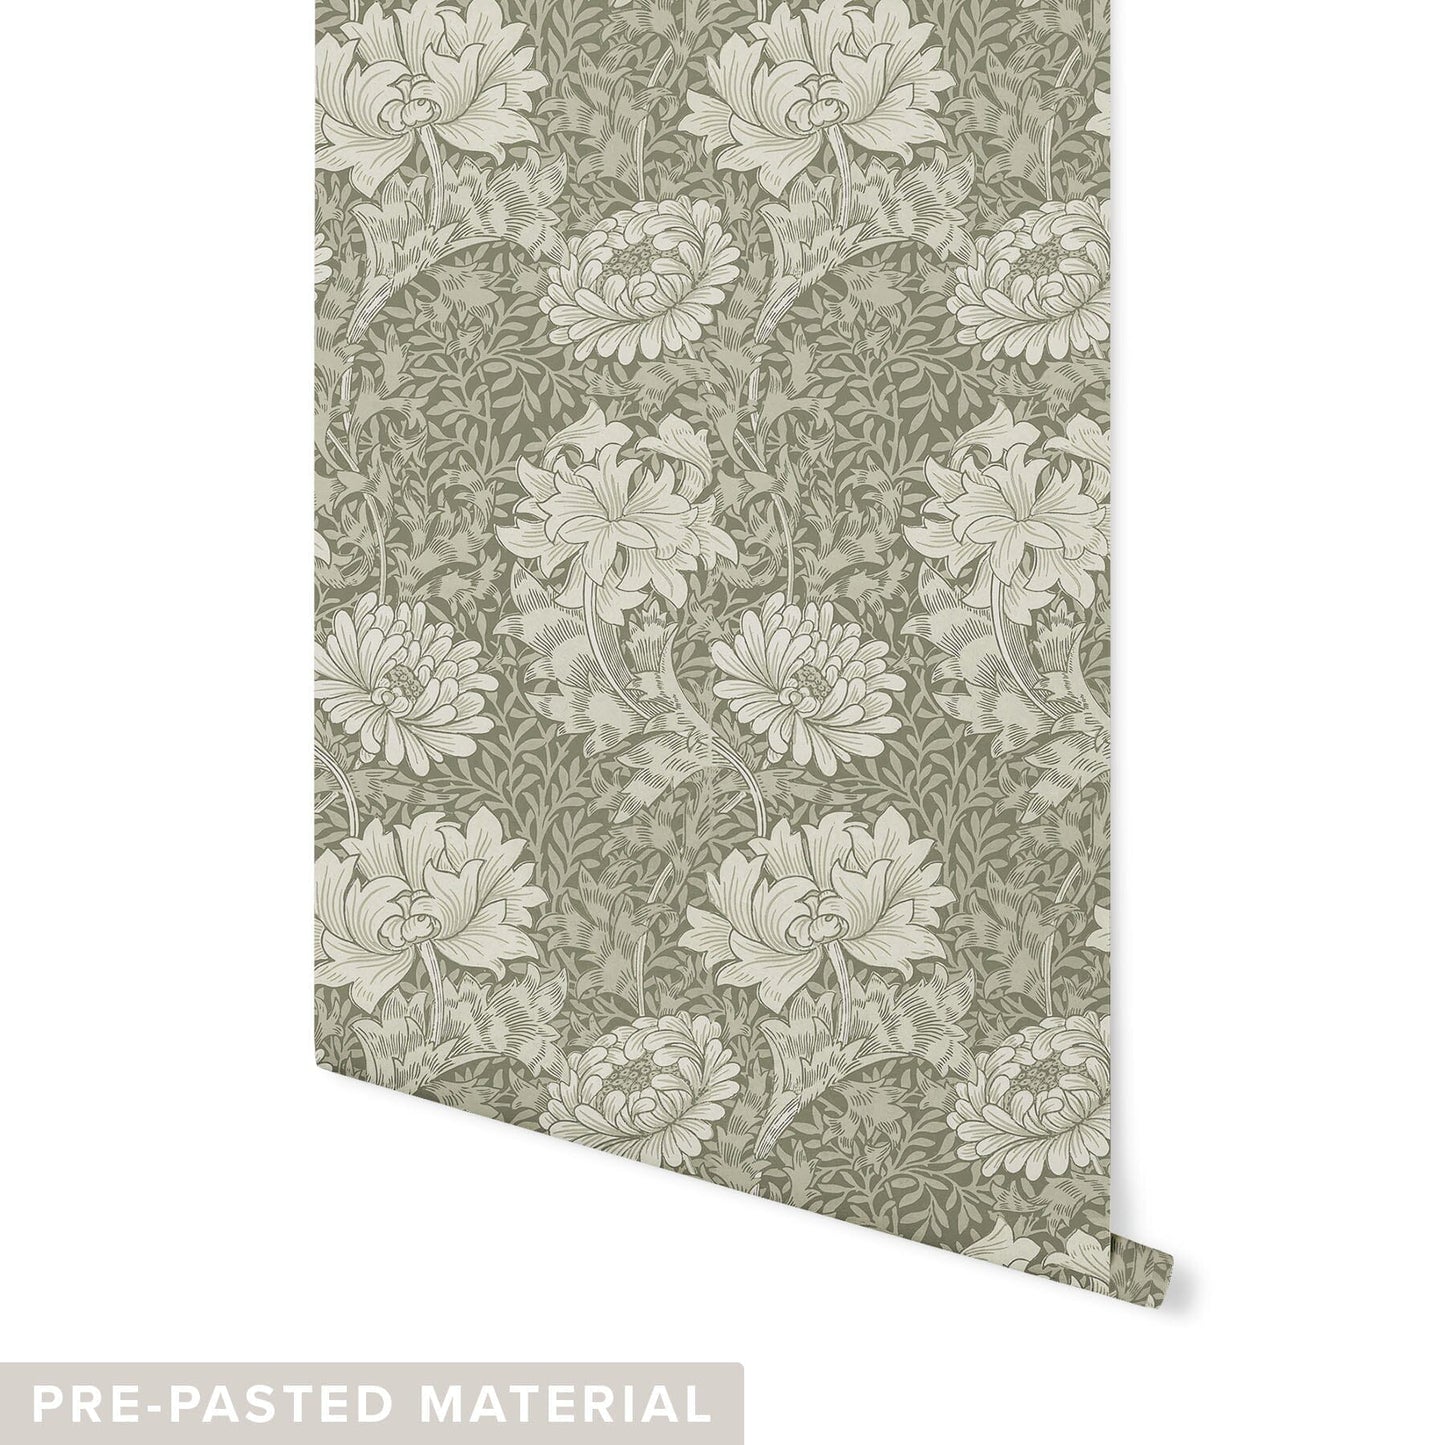 Water Lily Wallpaper Wallpaper Mia Parres Pre-pasted Moss DOUBLE ROLL : 46" X 4 FEET